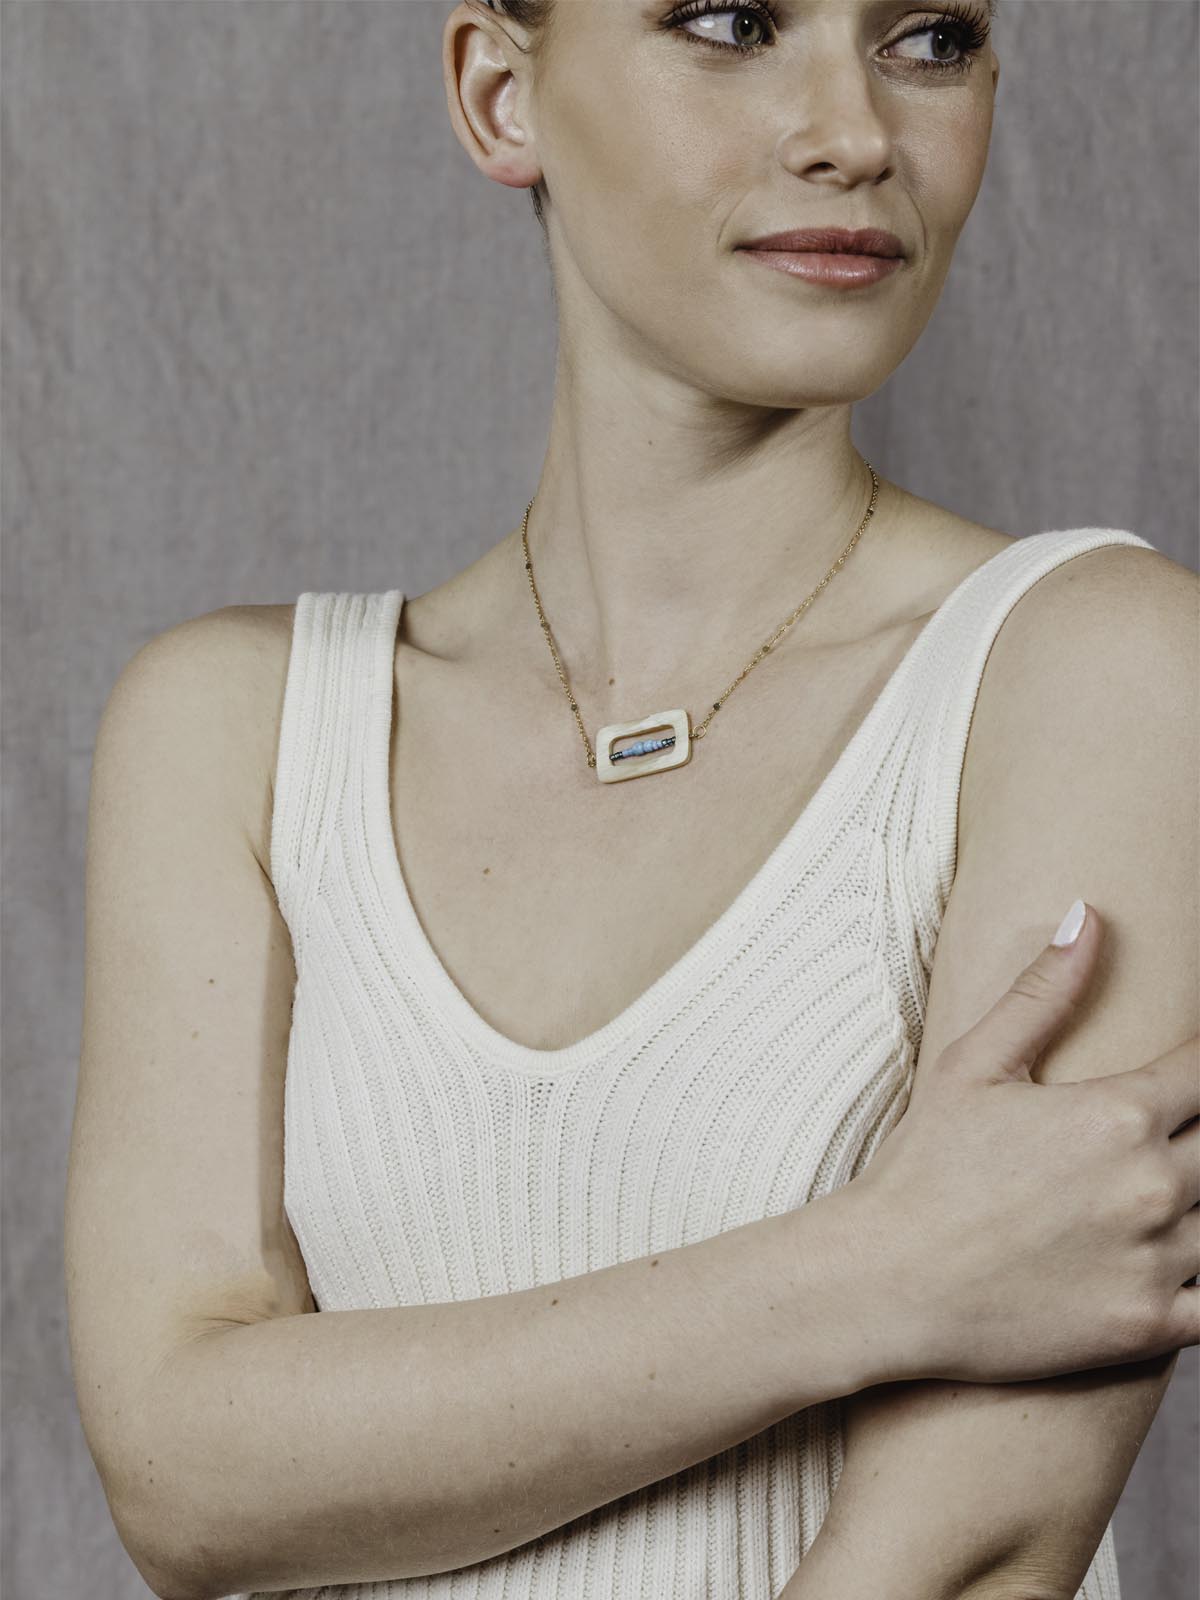 model wearing golden chain with details in the chain. Rectangulat pendant with turquoise beads in the middle of the rectangle shape. 